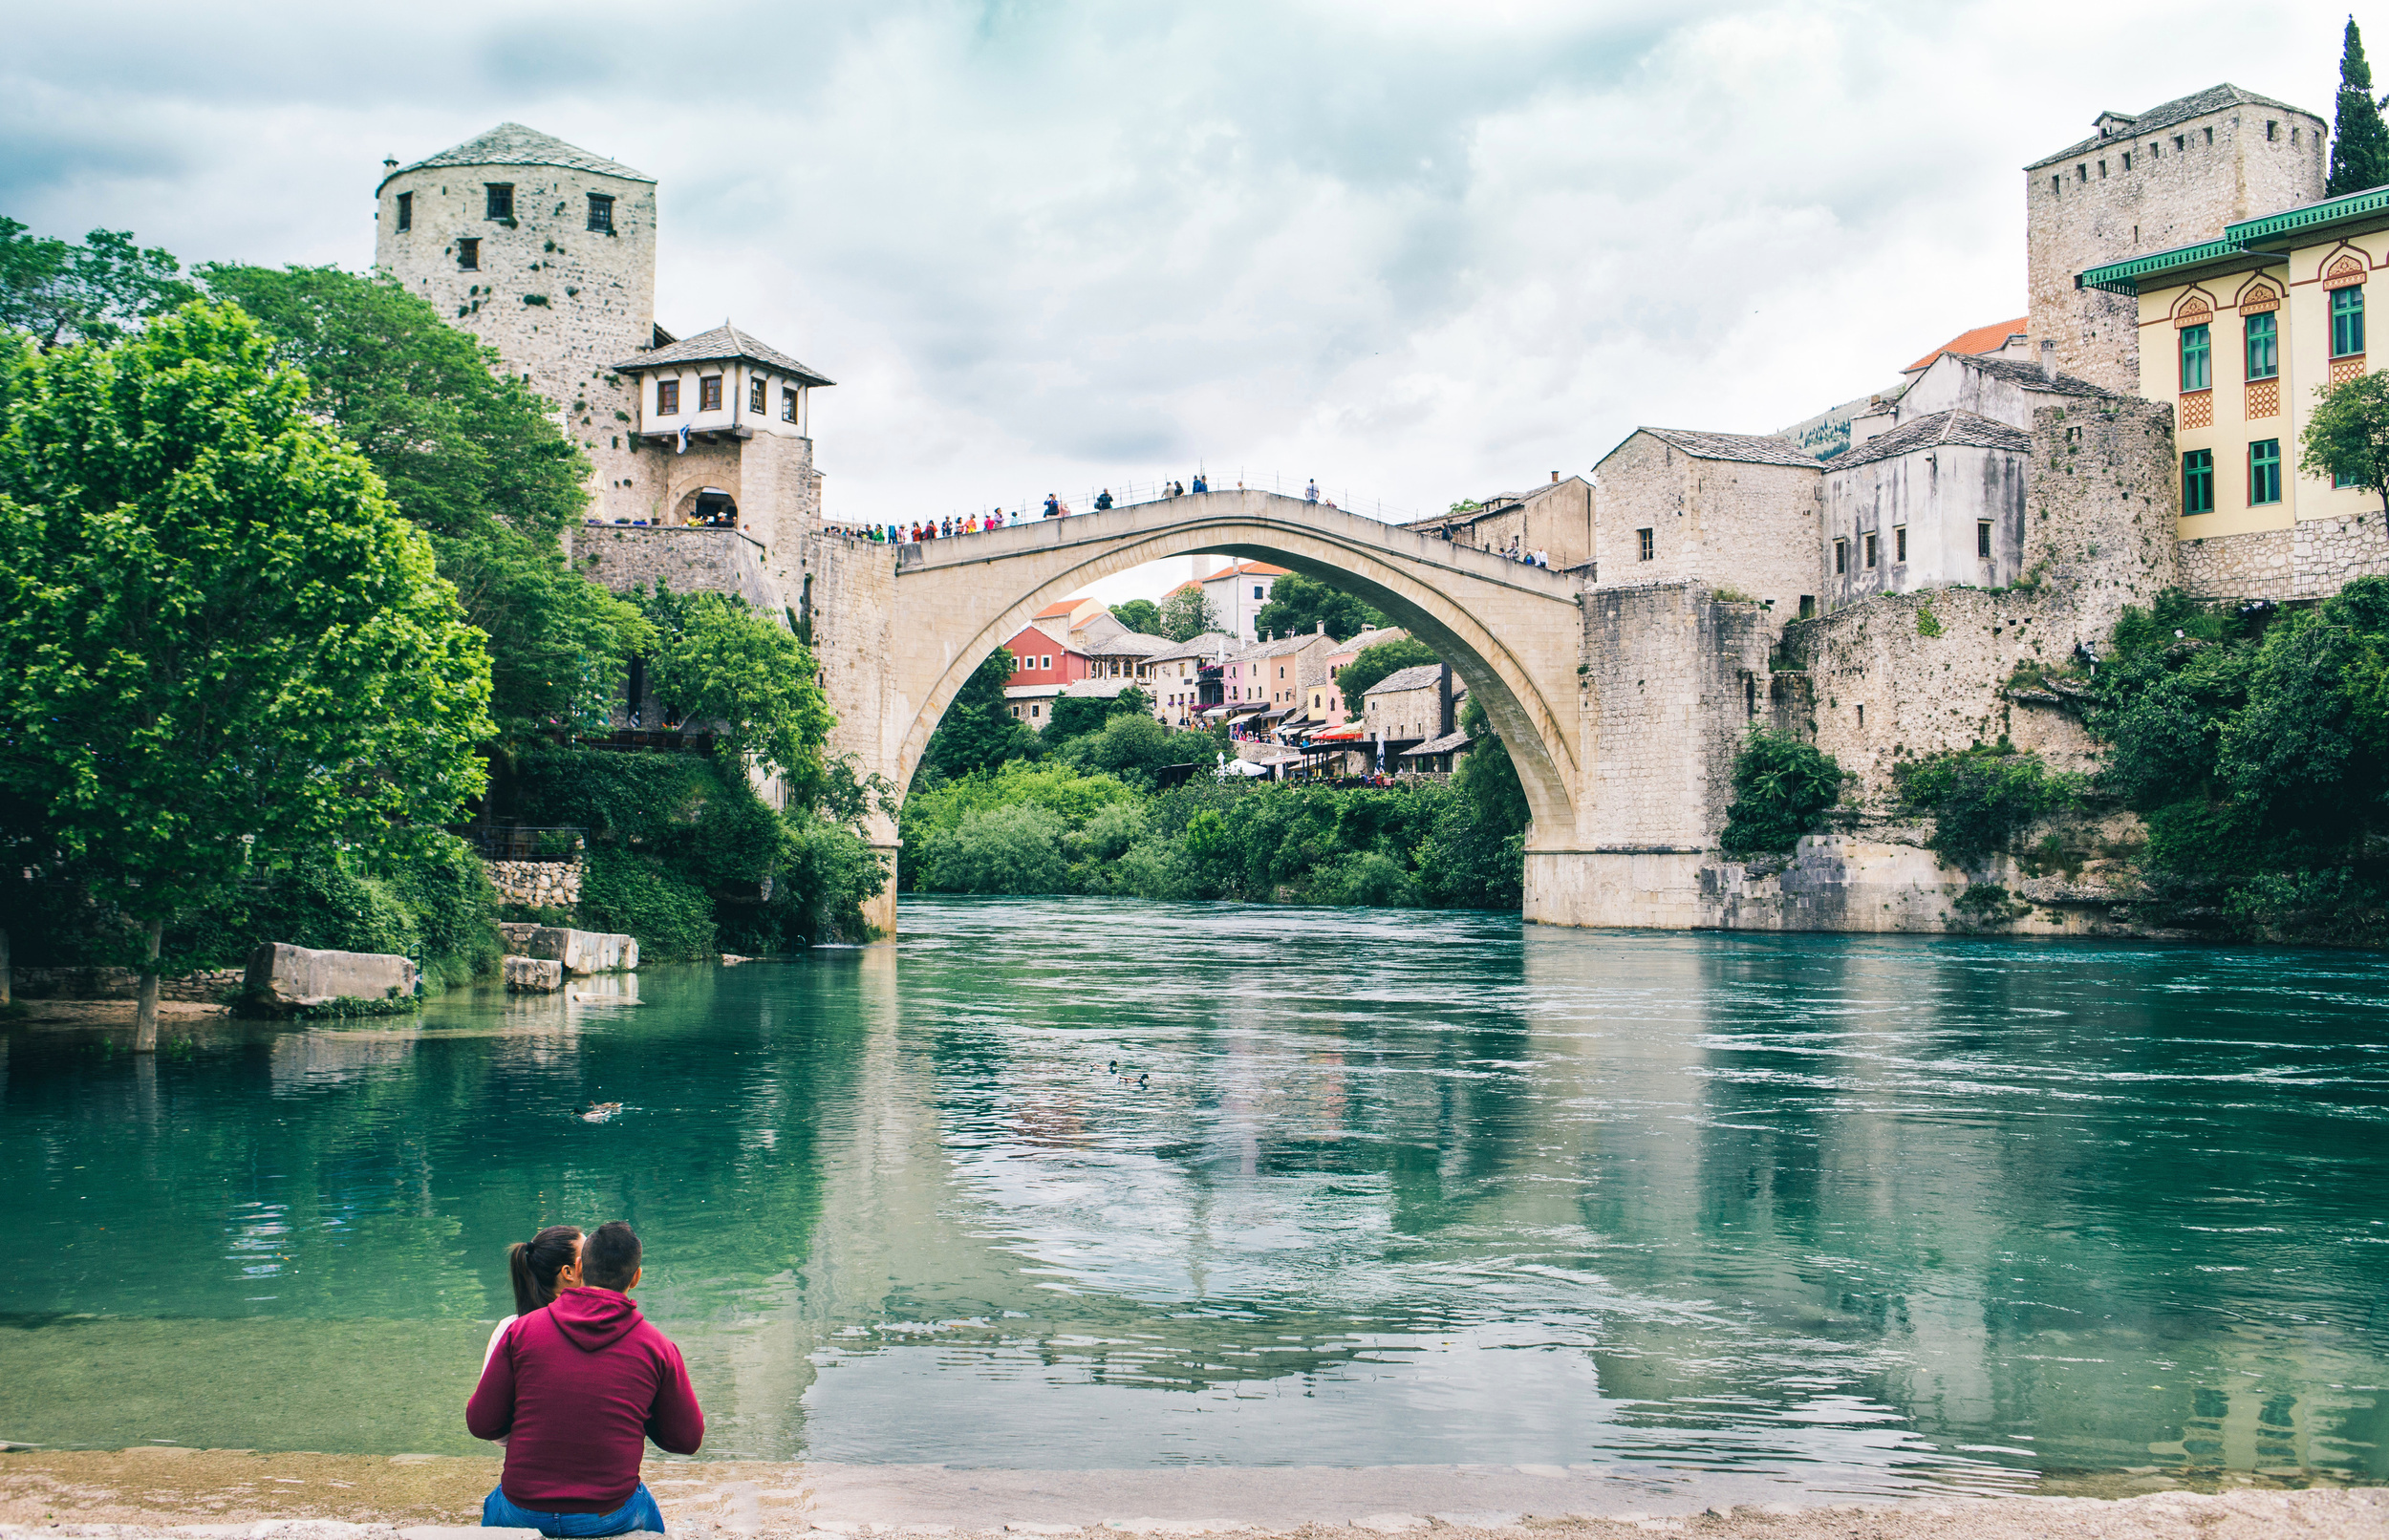 <p>This small town in the Herzegovina part of the country is popular as a day trip from Croatia. However, couples looking for a bit of magic should stay a night or two. Walk around the Old Town and enjoy the bridge lit up at night, have a magical meal along the river, or go wine tasting.</p><p>You may also like: <a href='https://www.yardbarker.com/lifestyle/articles/the_20_best_european_beach_destinations_012224/s1__39607980'>The 20 best European beach destinations</a></p>